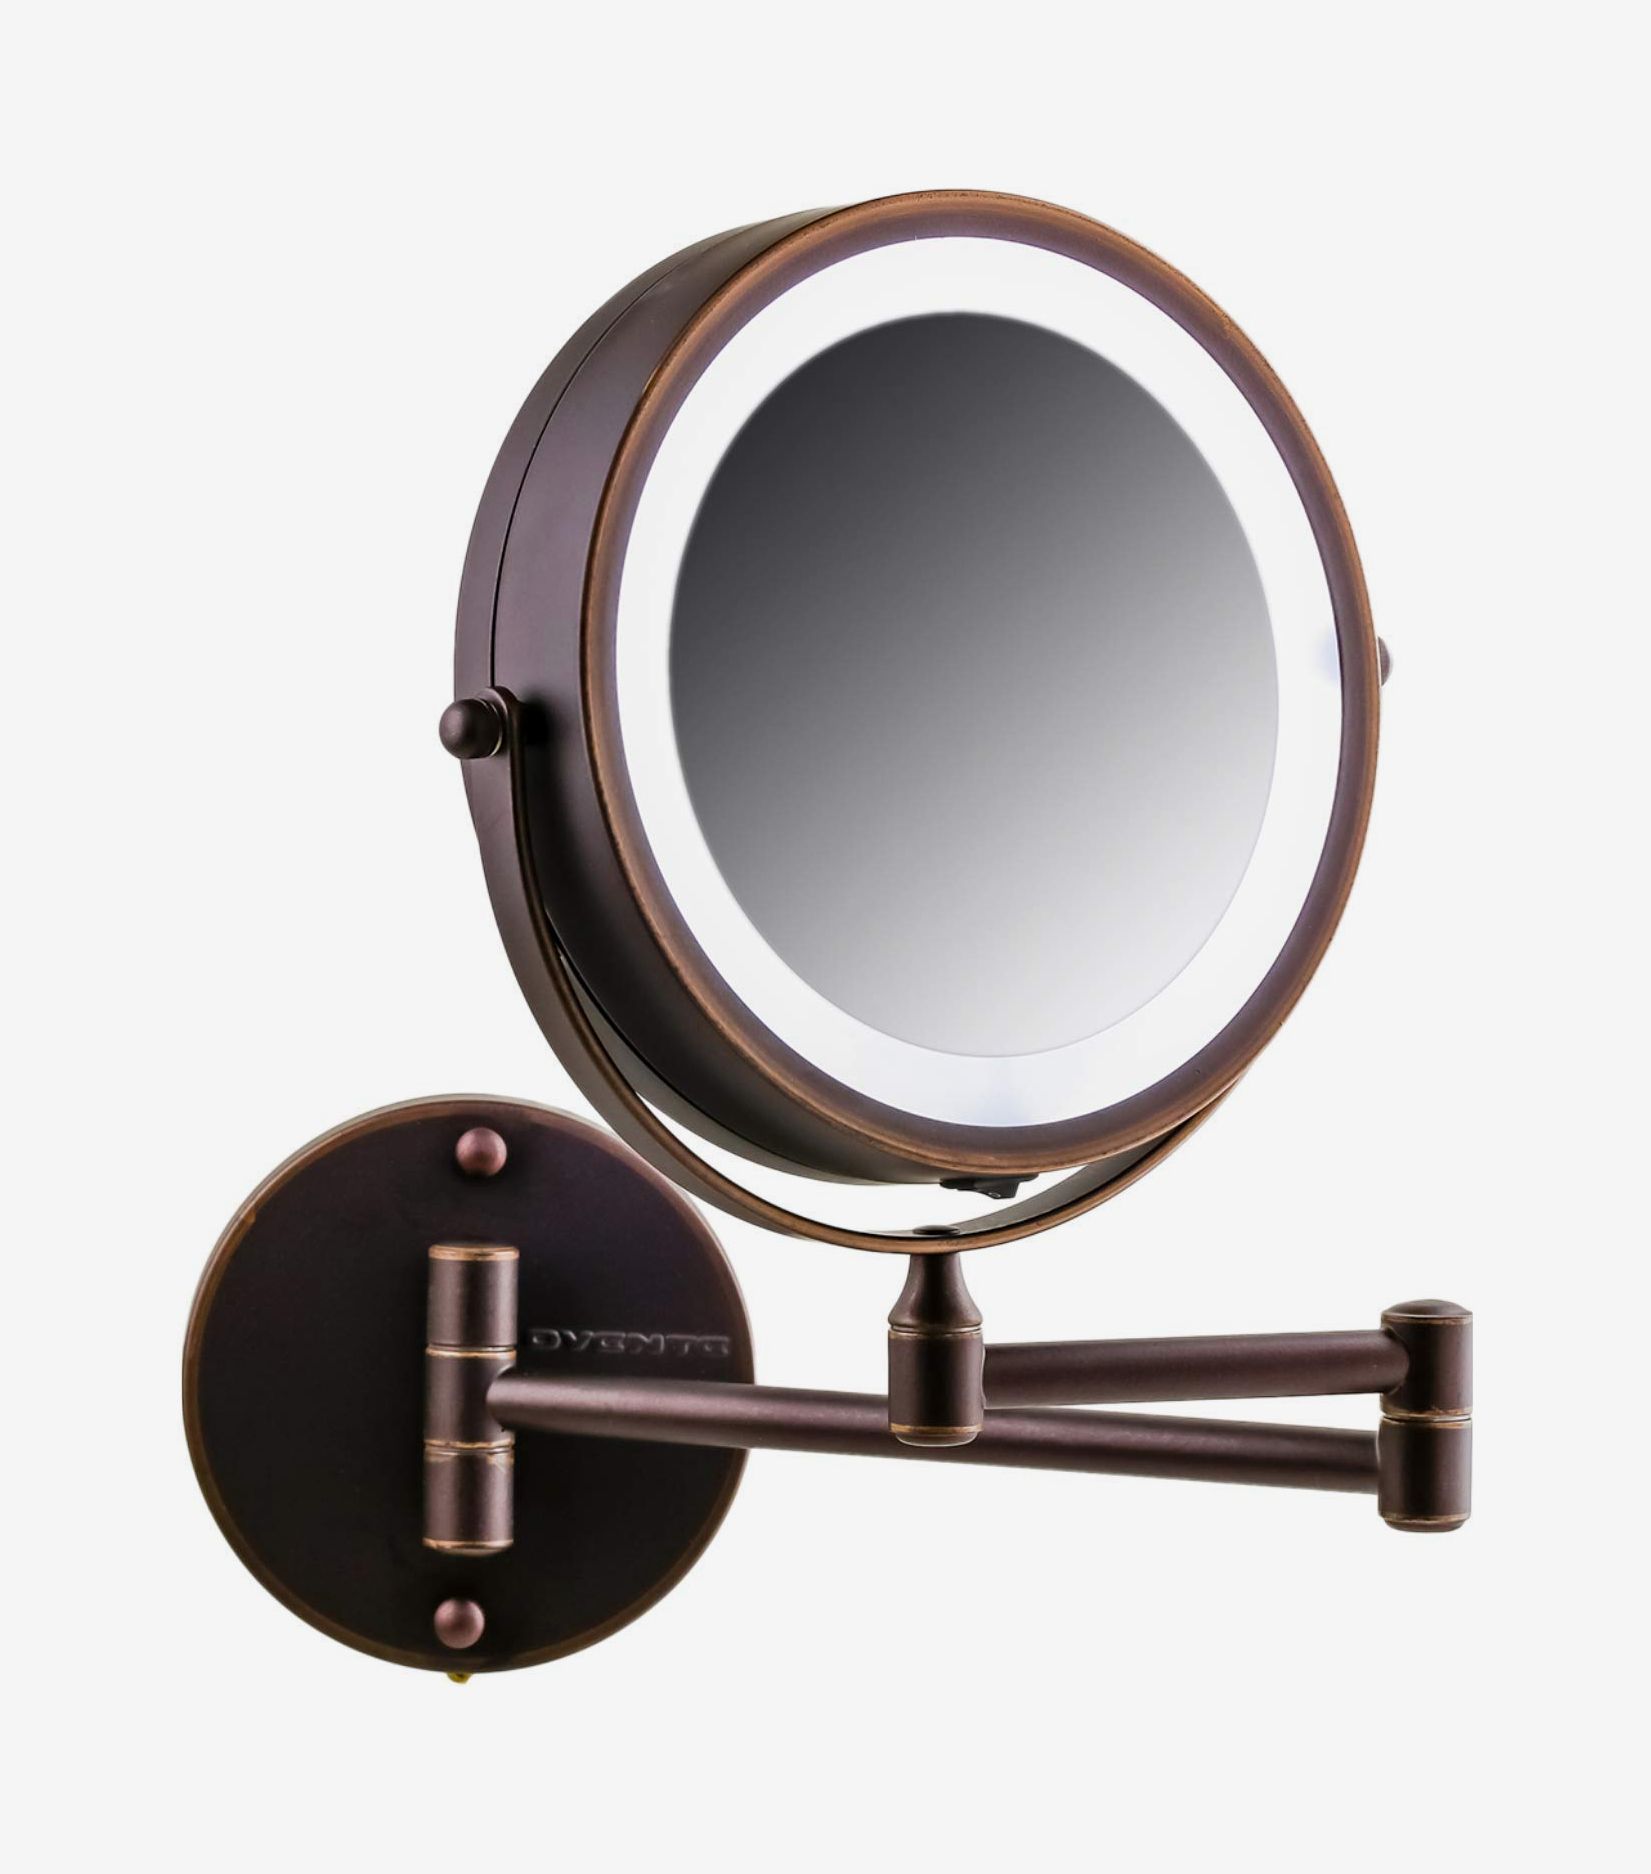 14 Best Lighted Makeup Mirrors 2021, What Is The Best Wall Mounted Lighted Makeup Mirror